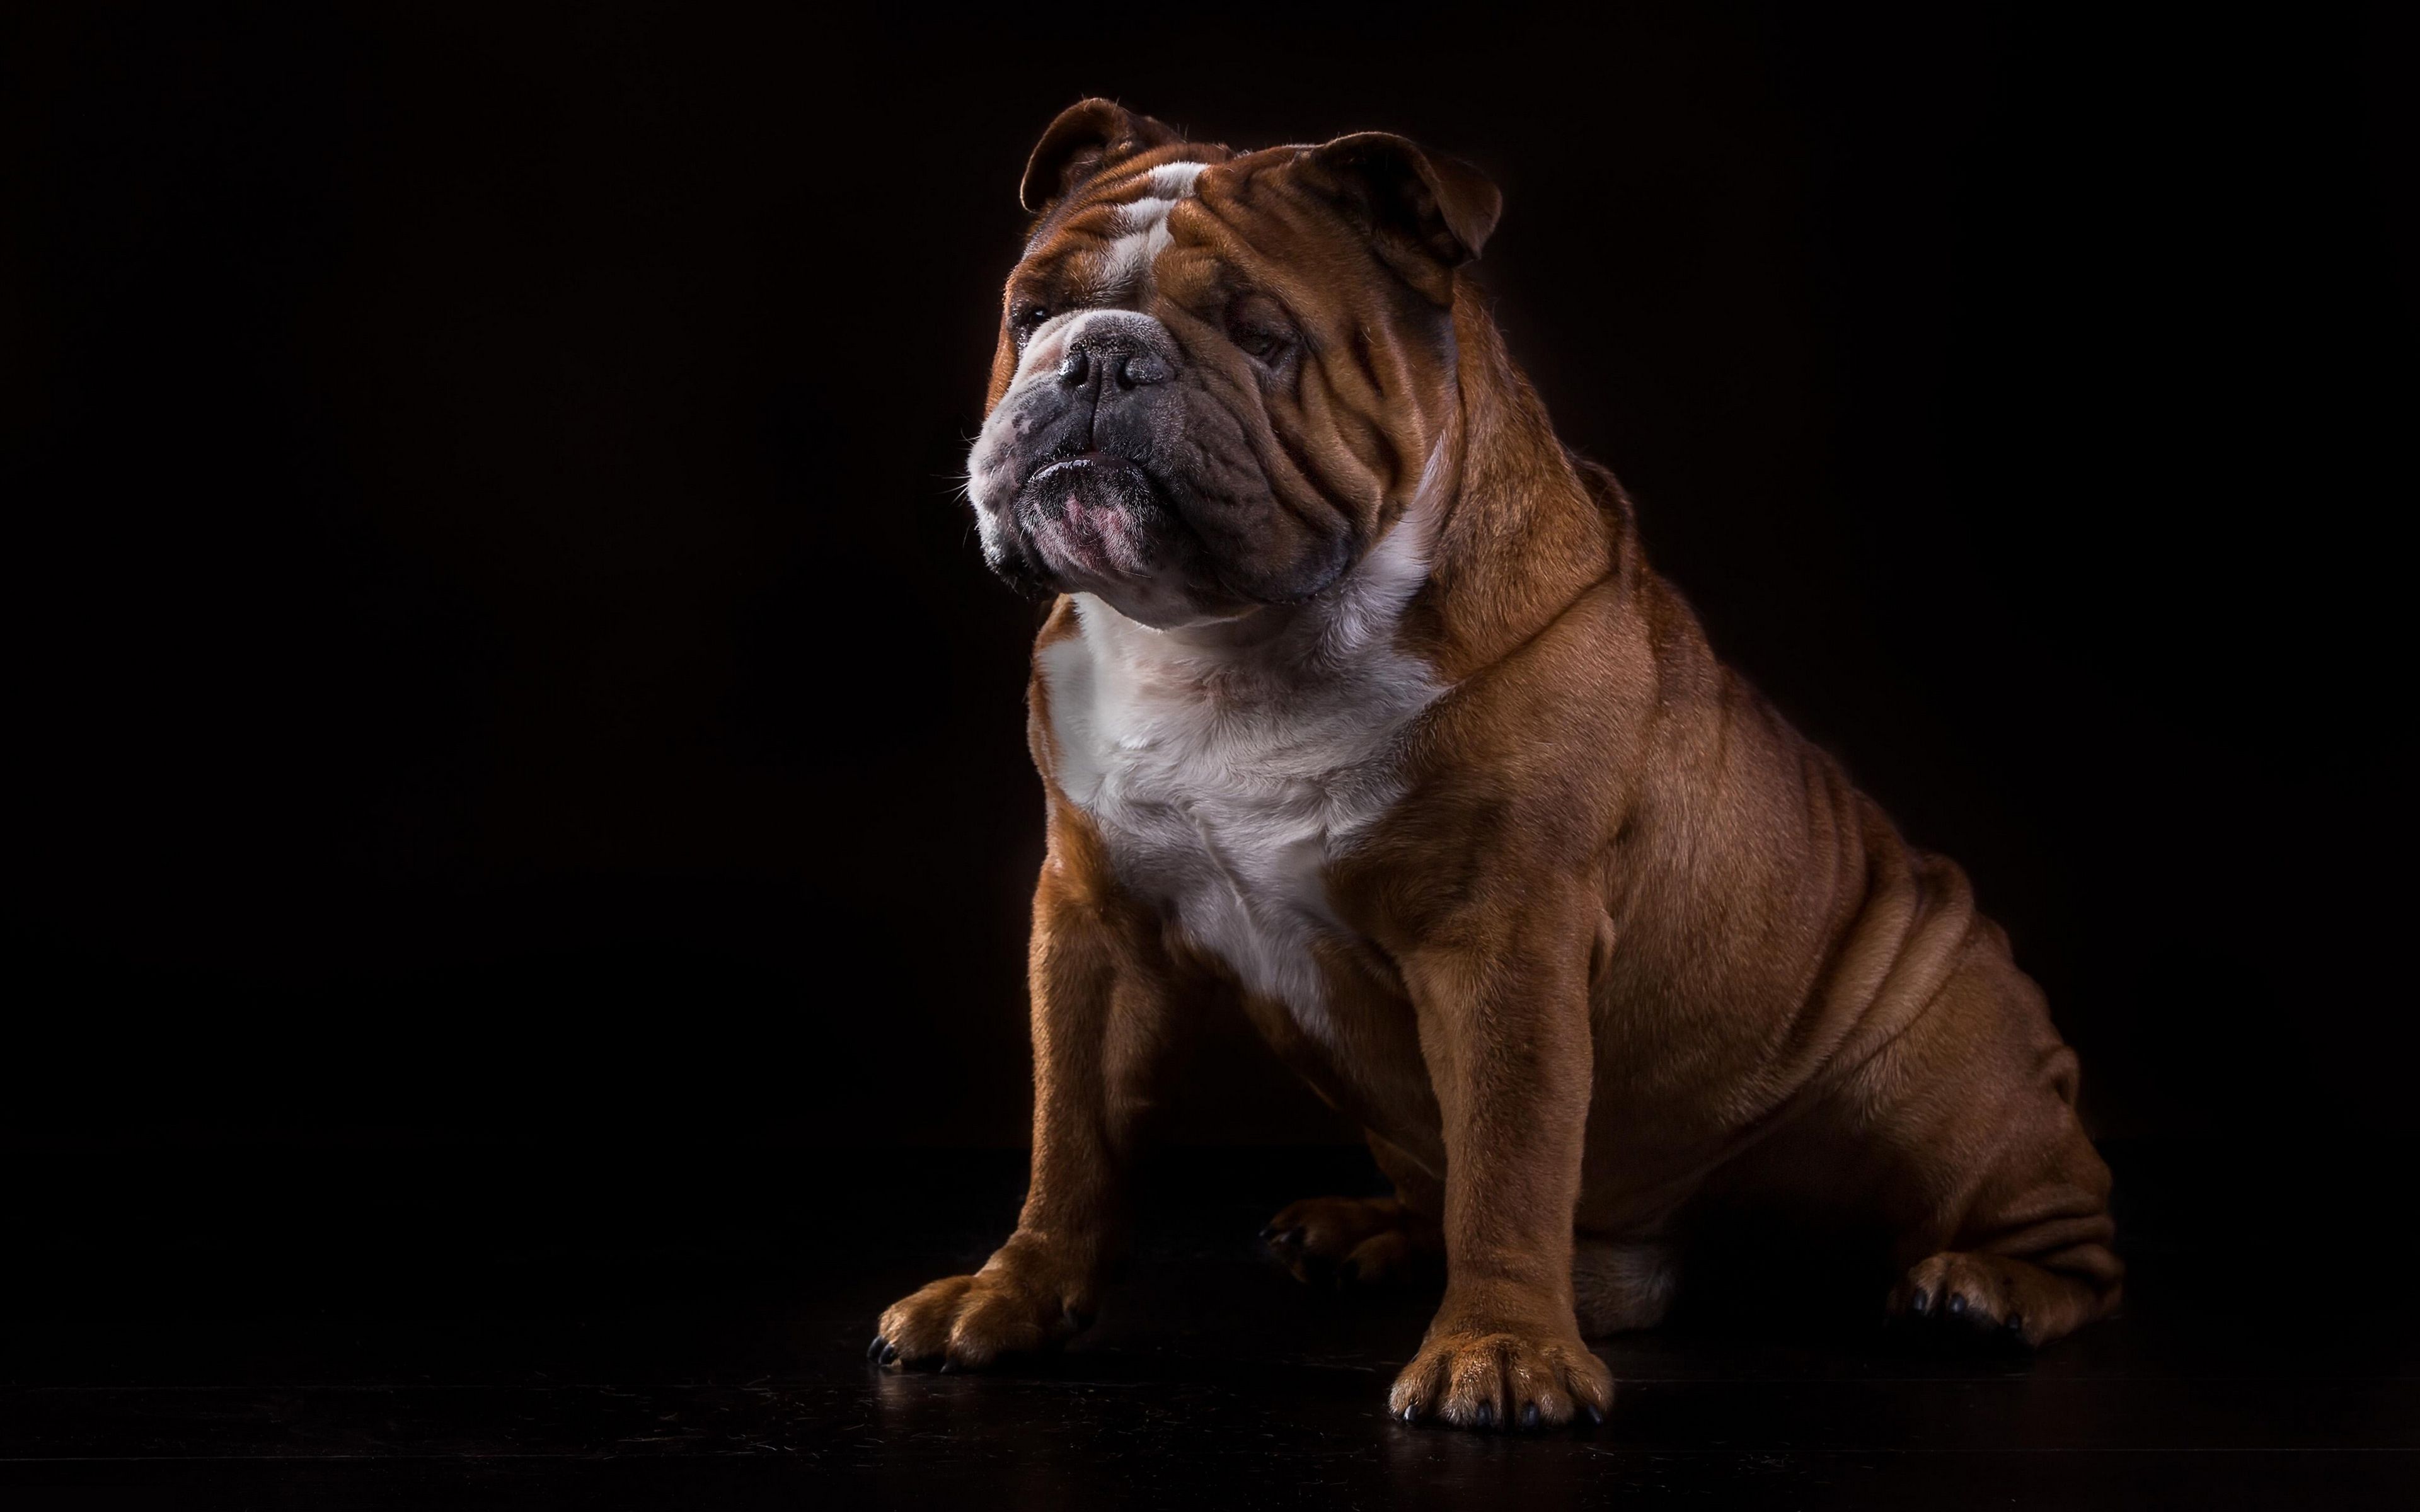 Download wallpaper English Bulldog, funny brown dog, pets, bulldog on a black background, dogs for desktop with resolution 3840x2400. High Quality HD picture wallpaper